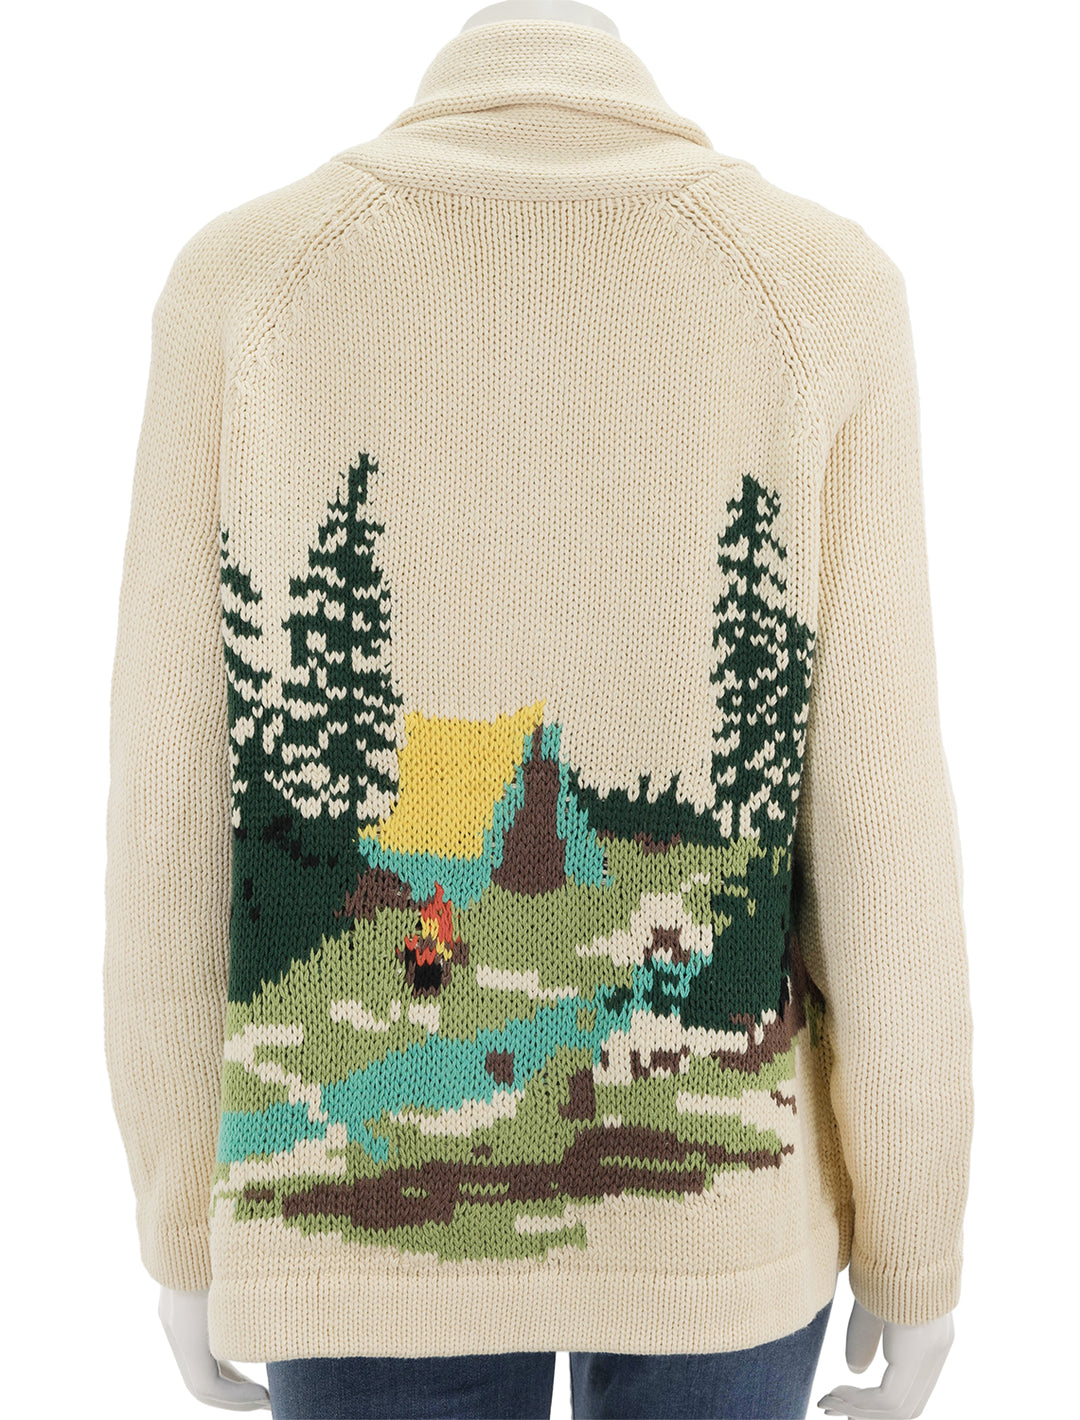 Back view of The Great's the camp lodge cardigan in cream.